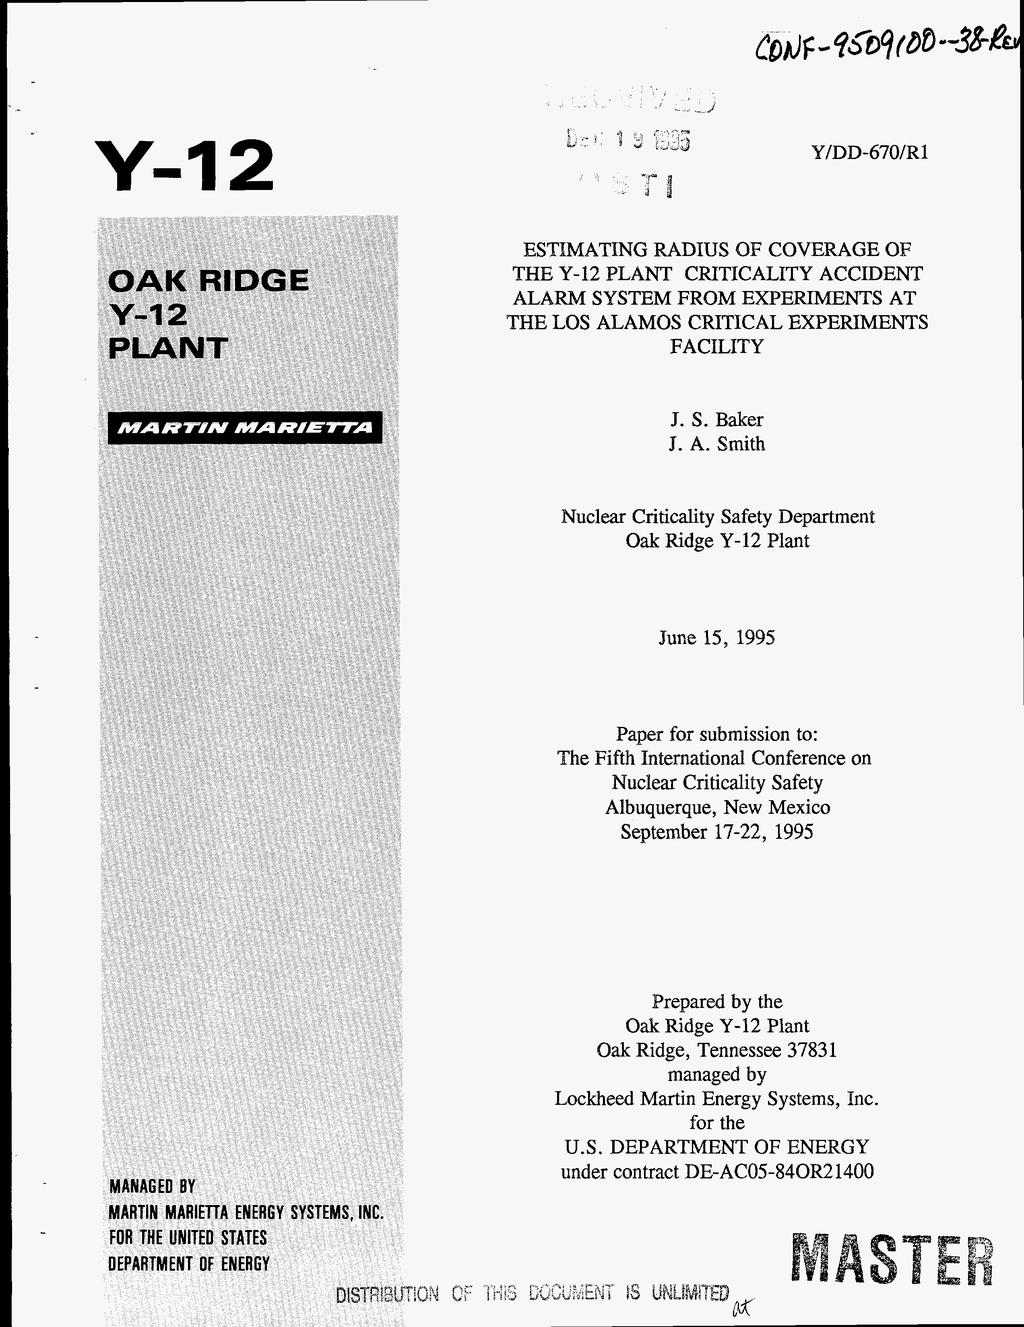 % 2 ESTMATNG RADUS OF COVERAGE OF THE Y-12 PLANT CRTCALTY AC